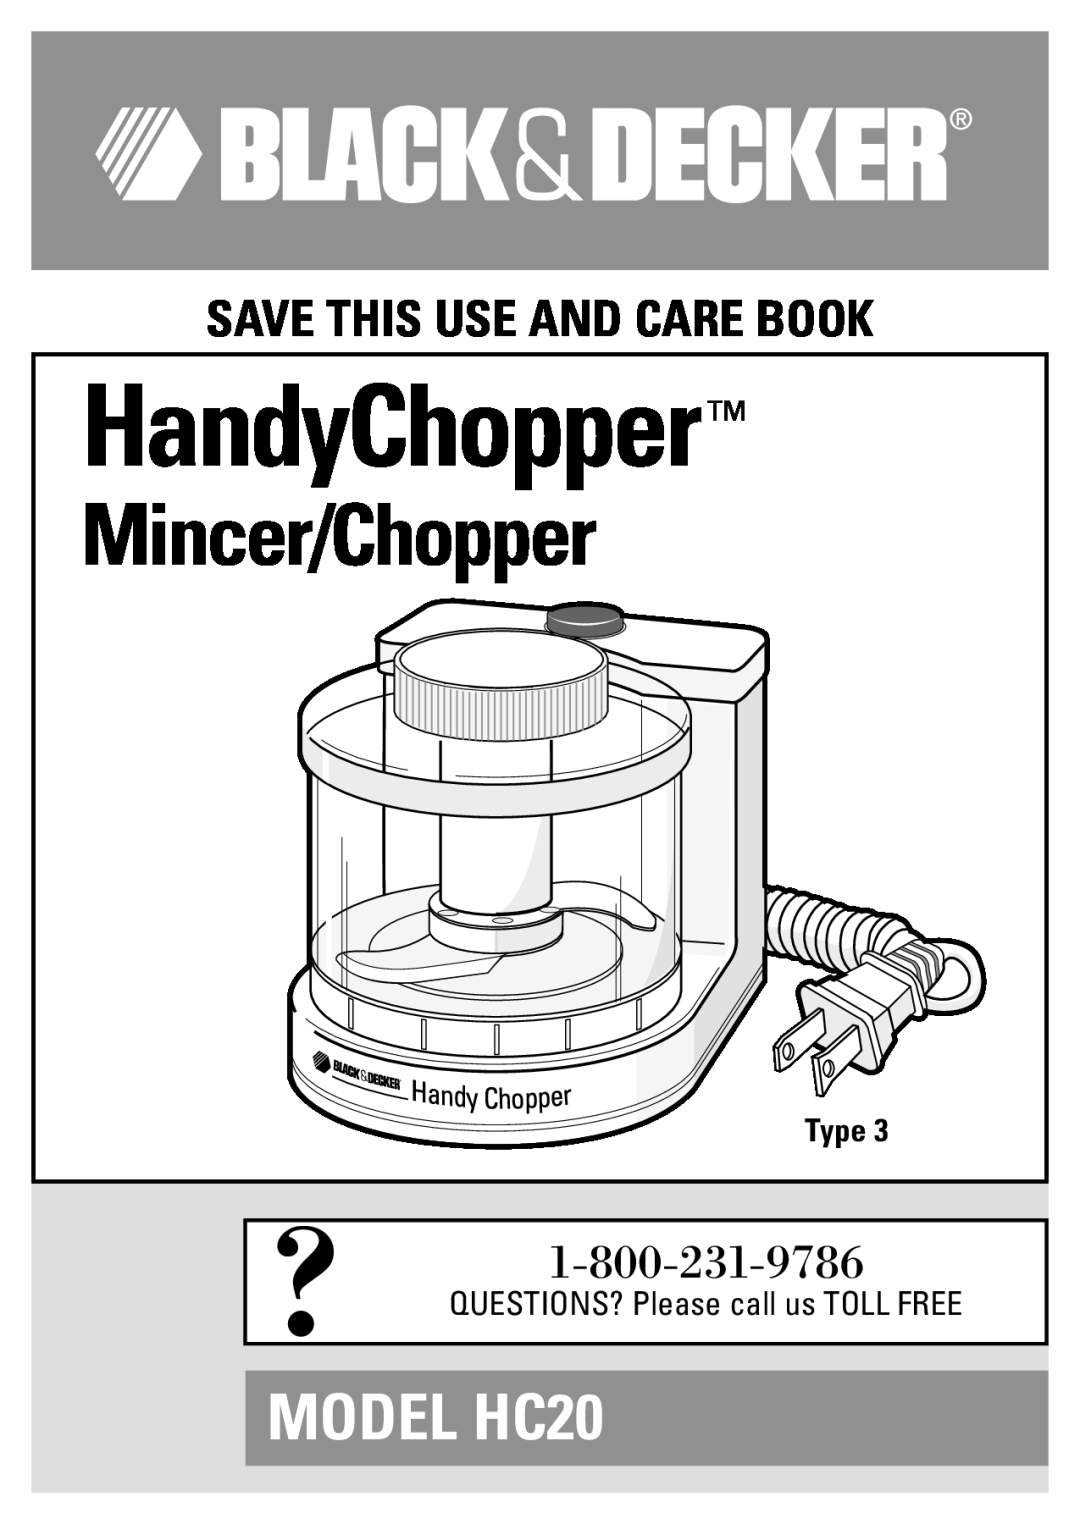 Black & Decker manual HandyChopper, Mincer/Chopper, MODEL HC20, Save This Use And Care Book, Type 